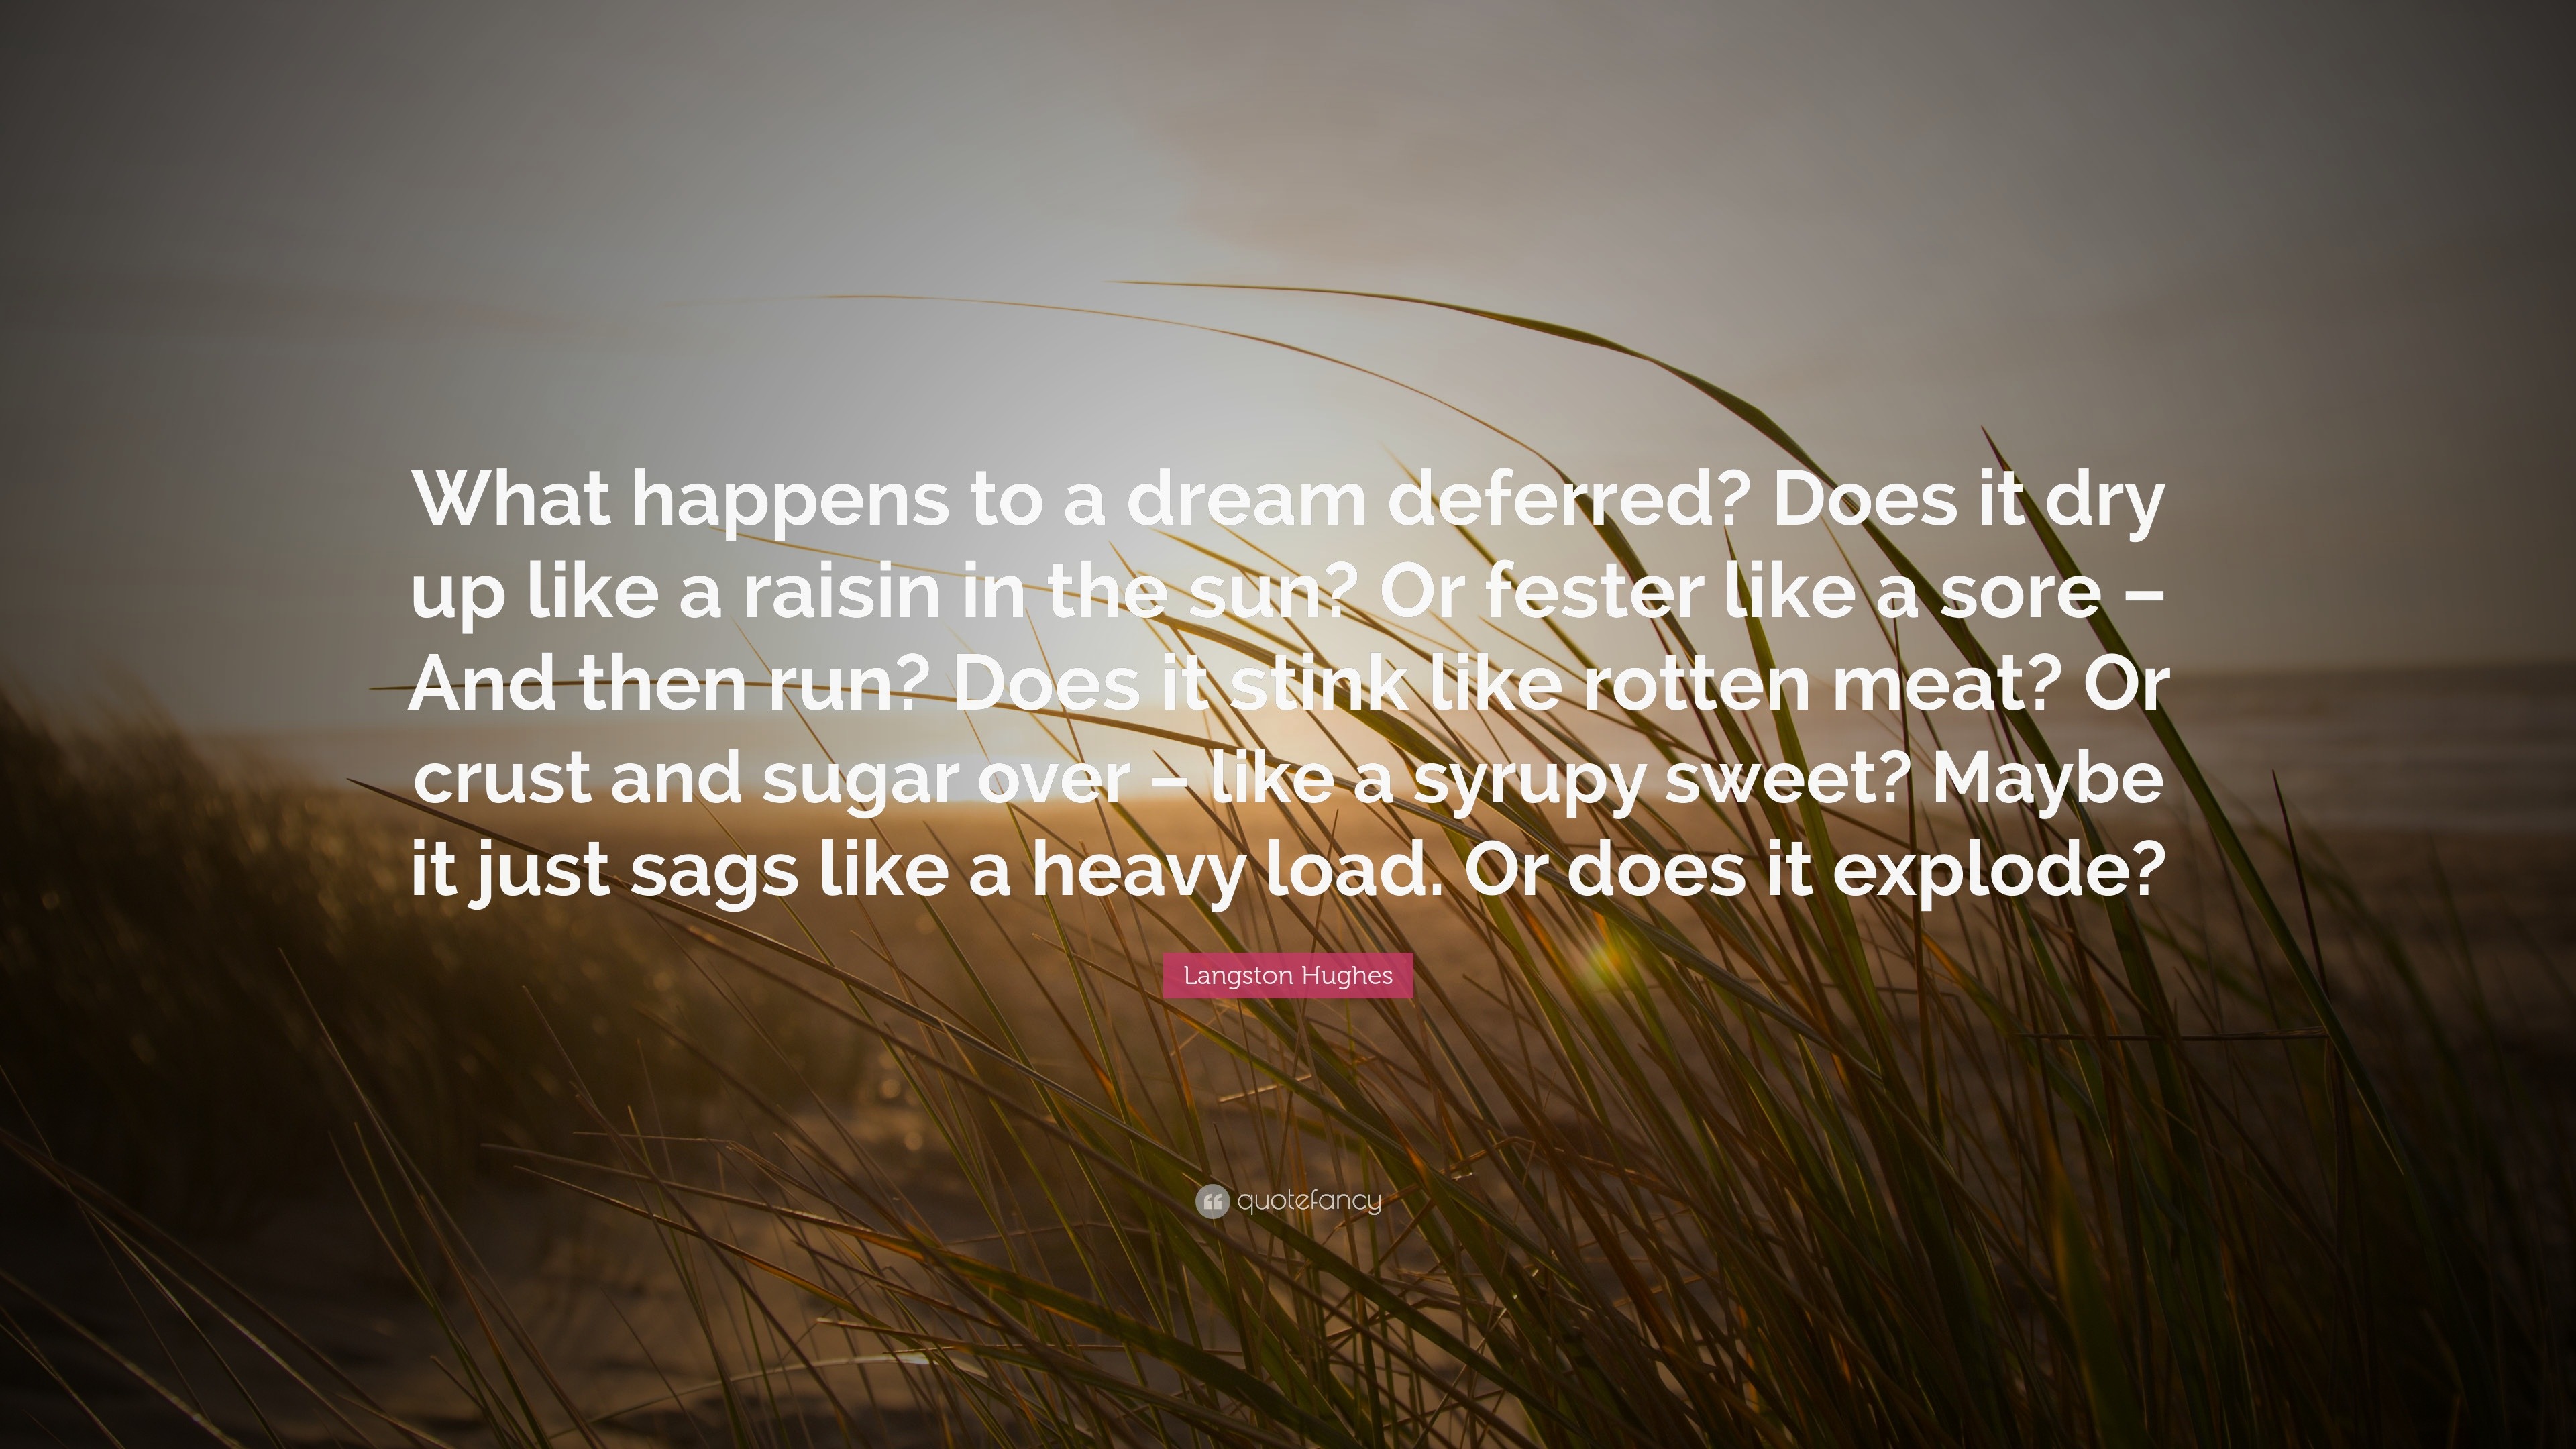 what happens to a dream deferred quote